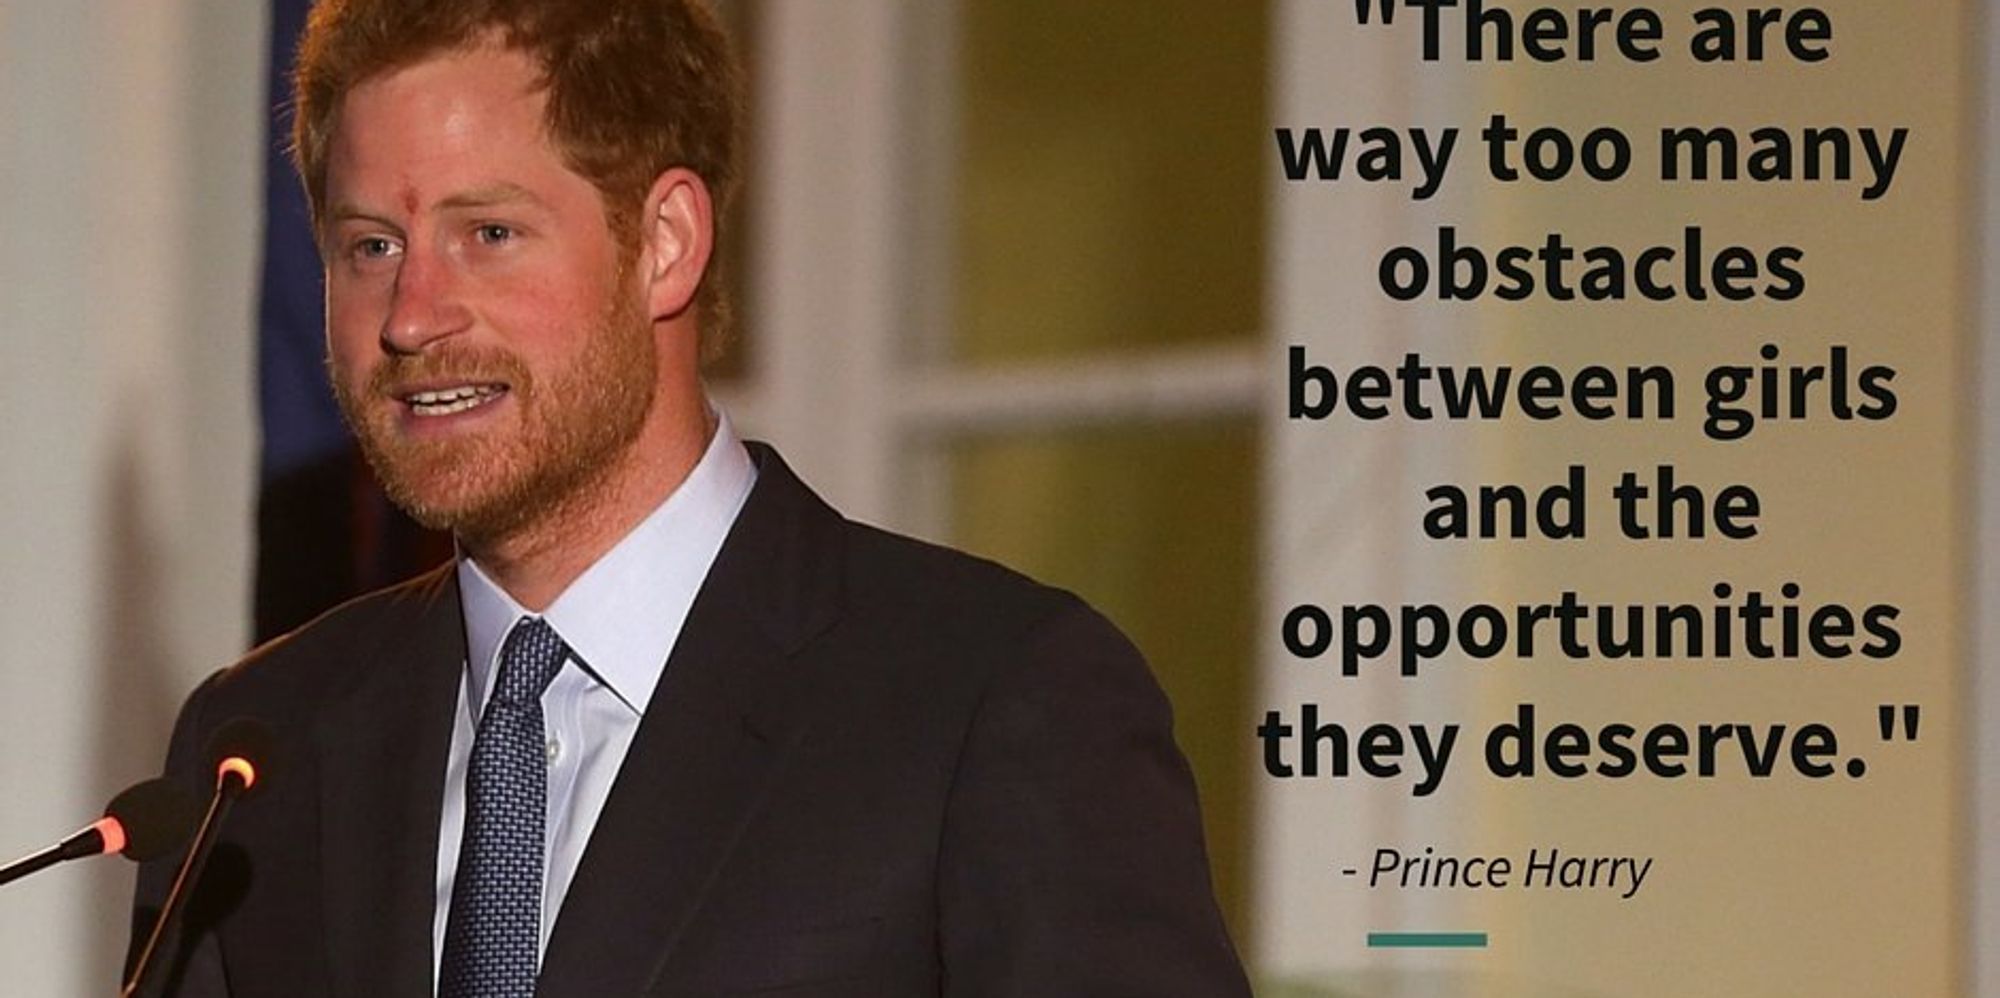 Prince Harry Gave A Wonderfully Feminist Speech About Women S Access To Education The